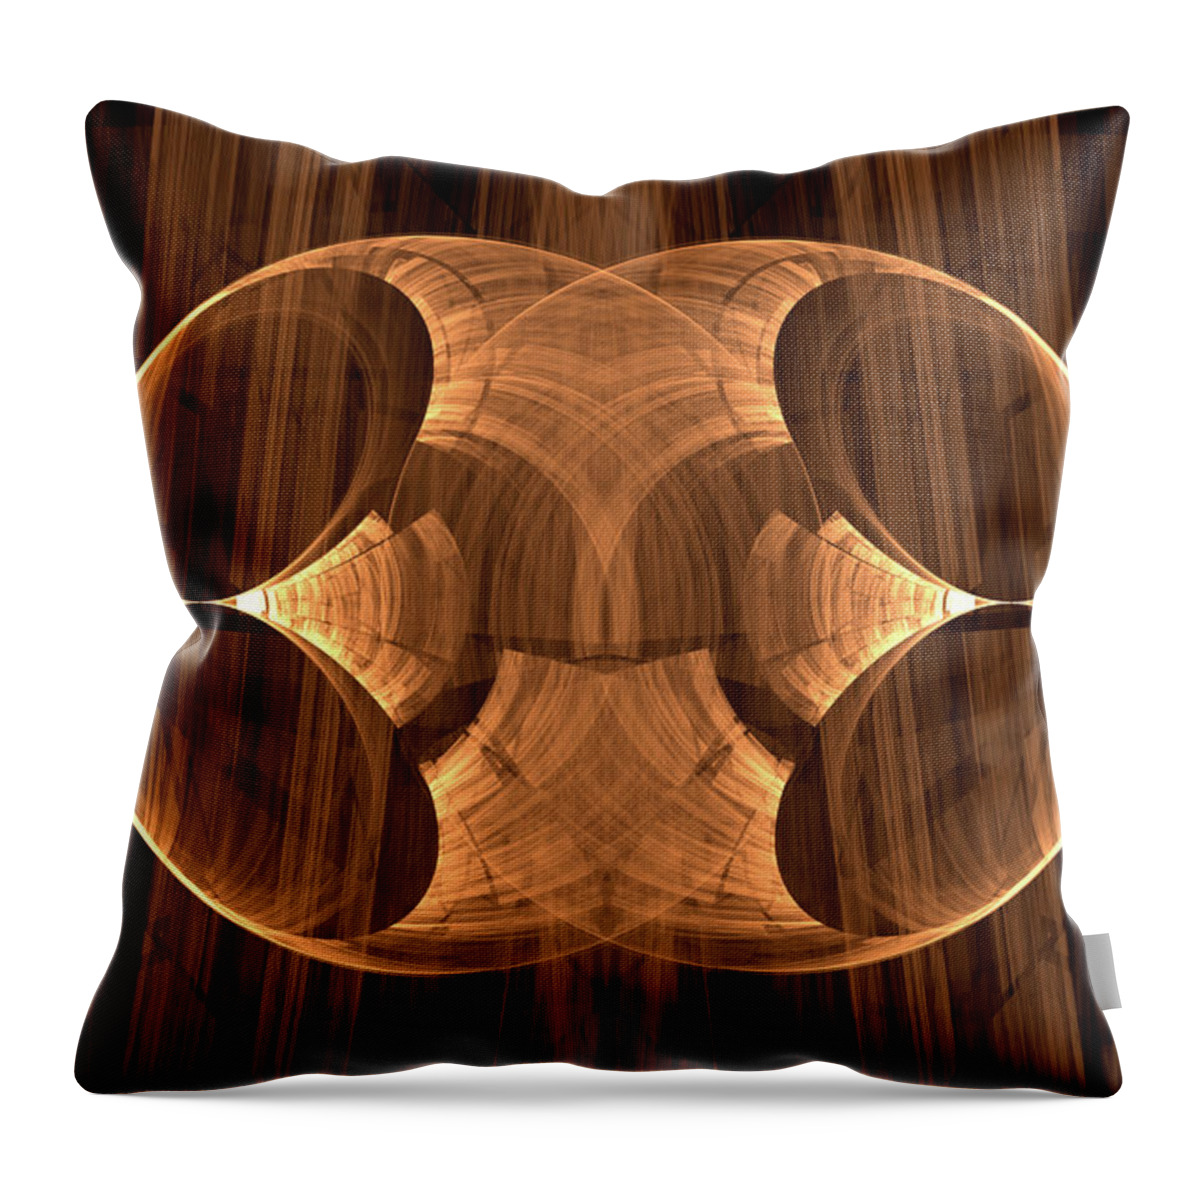 Titus Throw Pillow featuring the digital art Titus by Missy Gainer